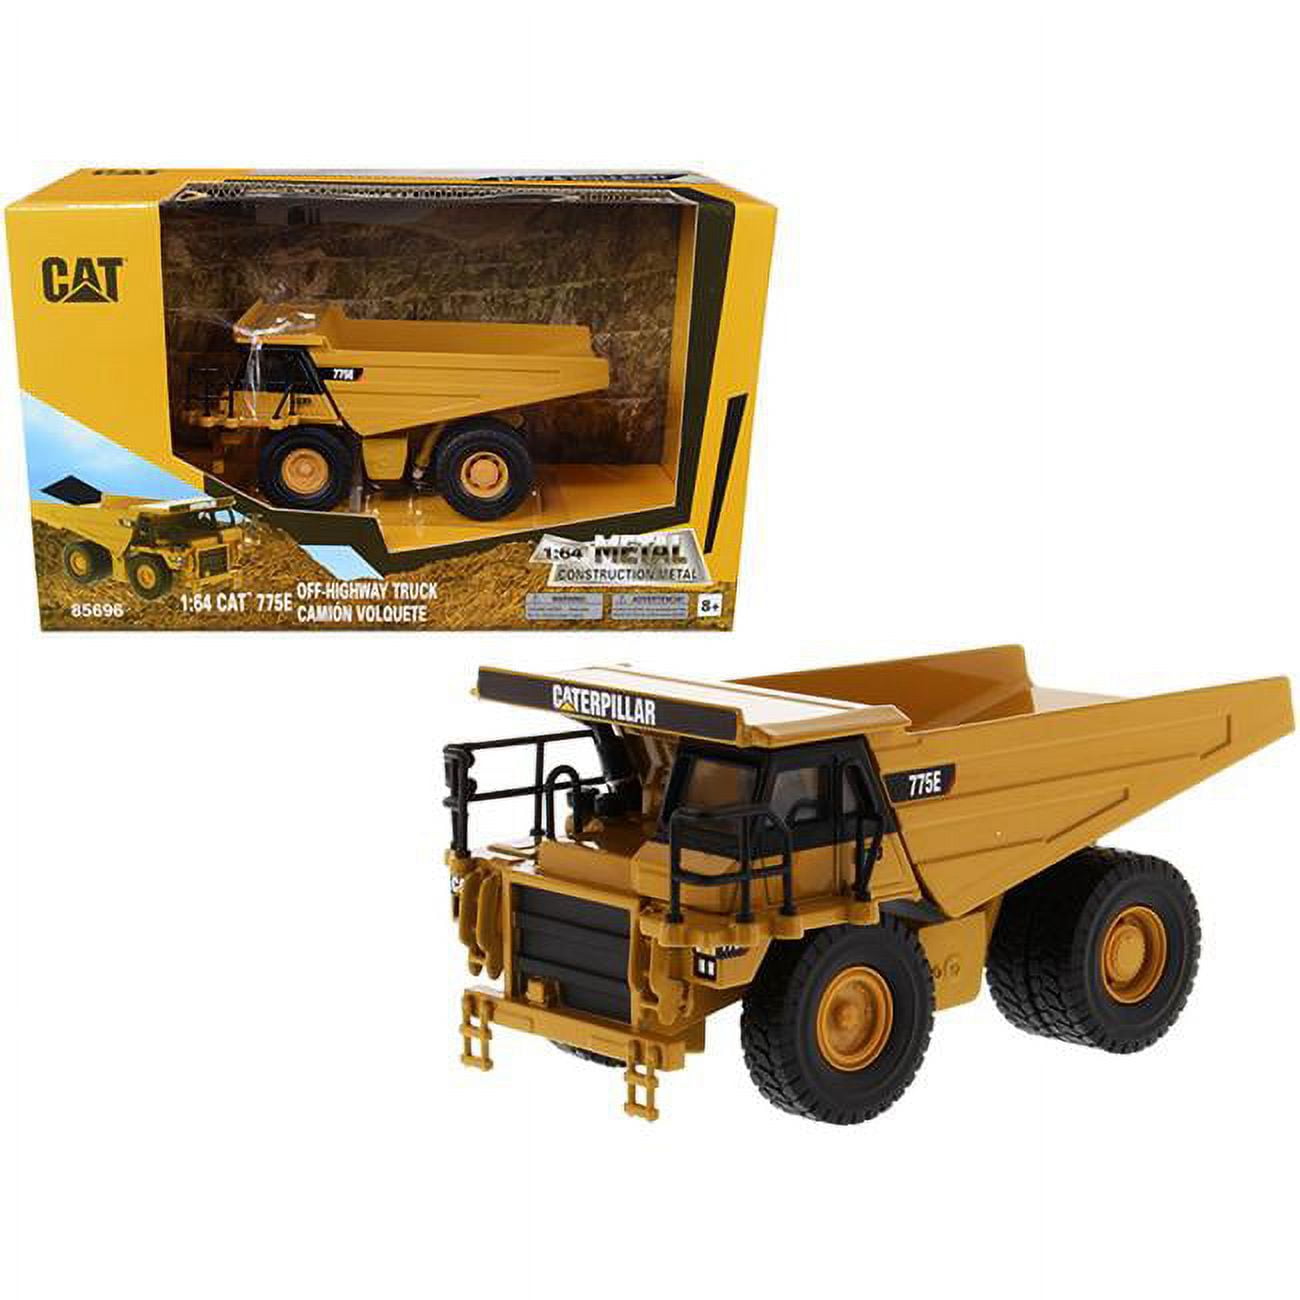 CAT Caterpillar 775E Off-Highway Dump Play & Collect 1 by 64 Scale Diecast Model Truck -  DIECAST MASTERS, DI94307